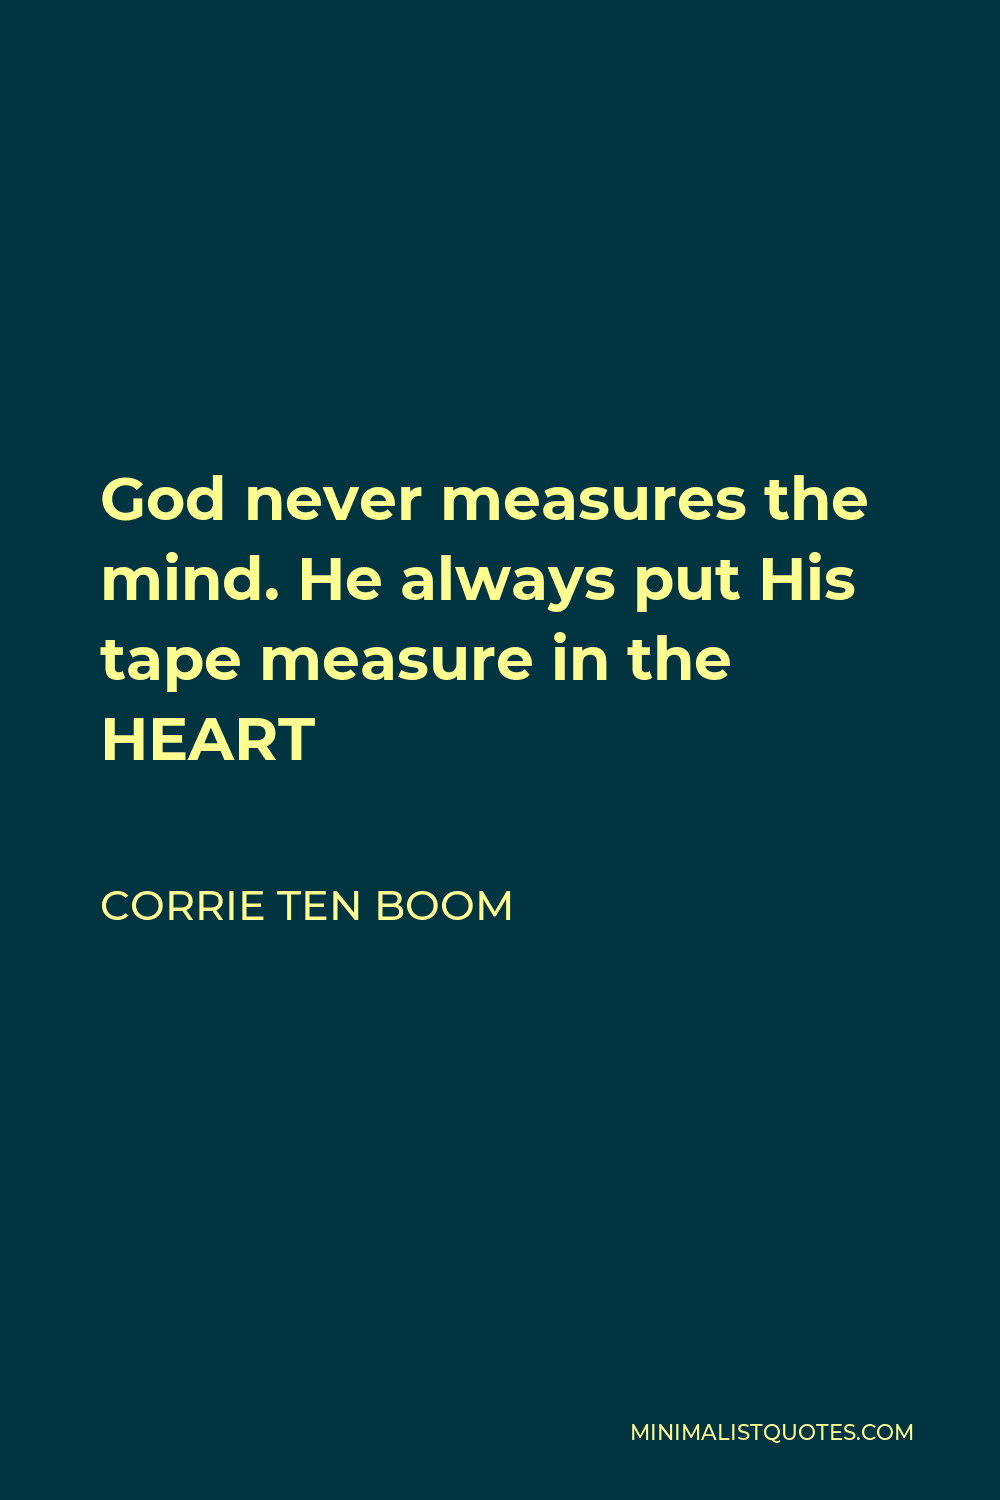 Corrie ten Boom Quote - God never measures the mind. He always put His tape measure in the HEART